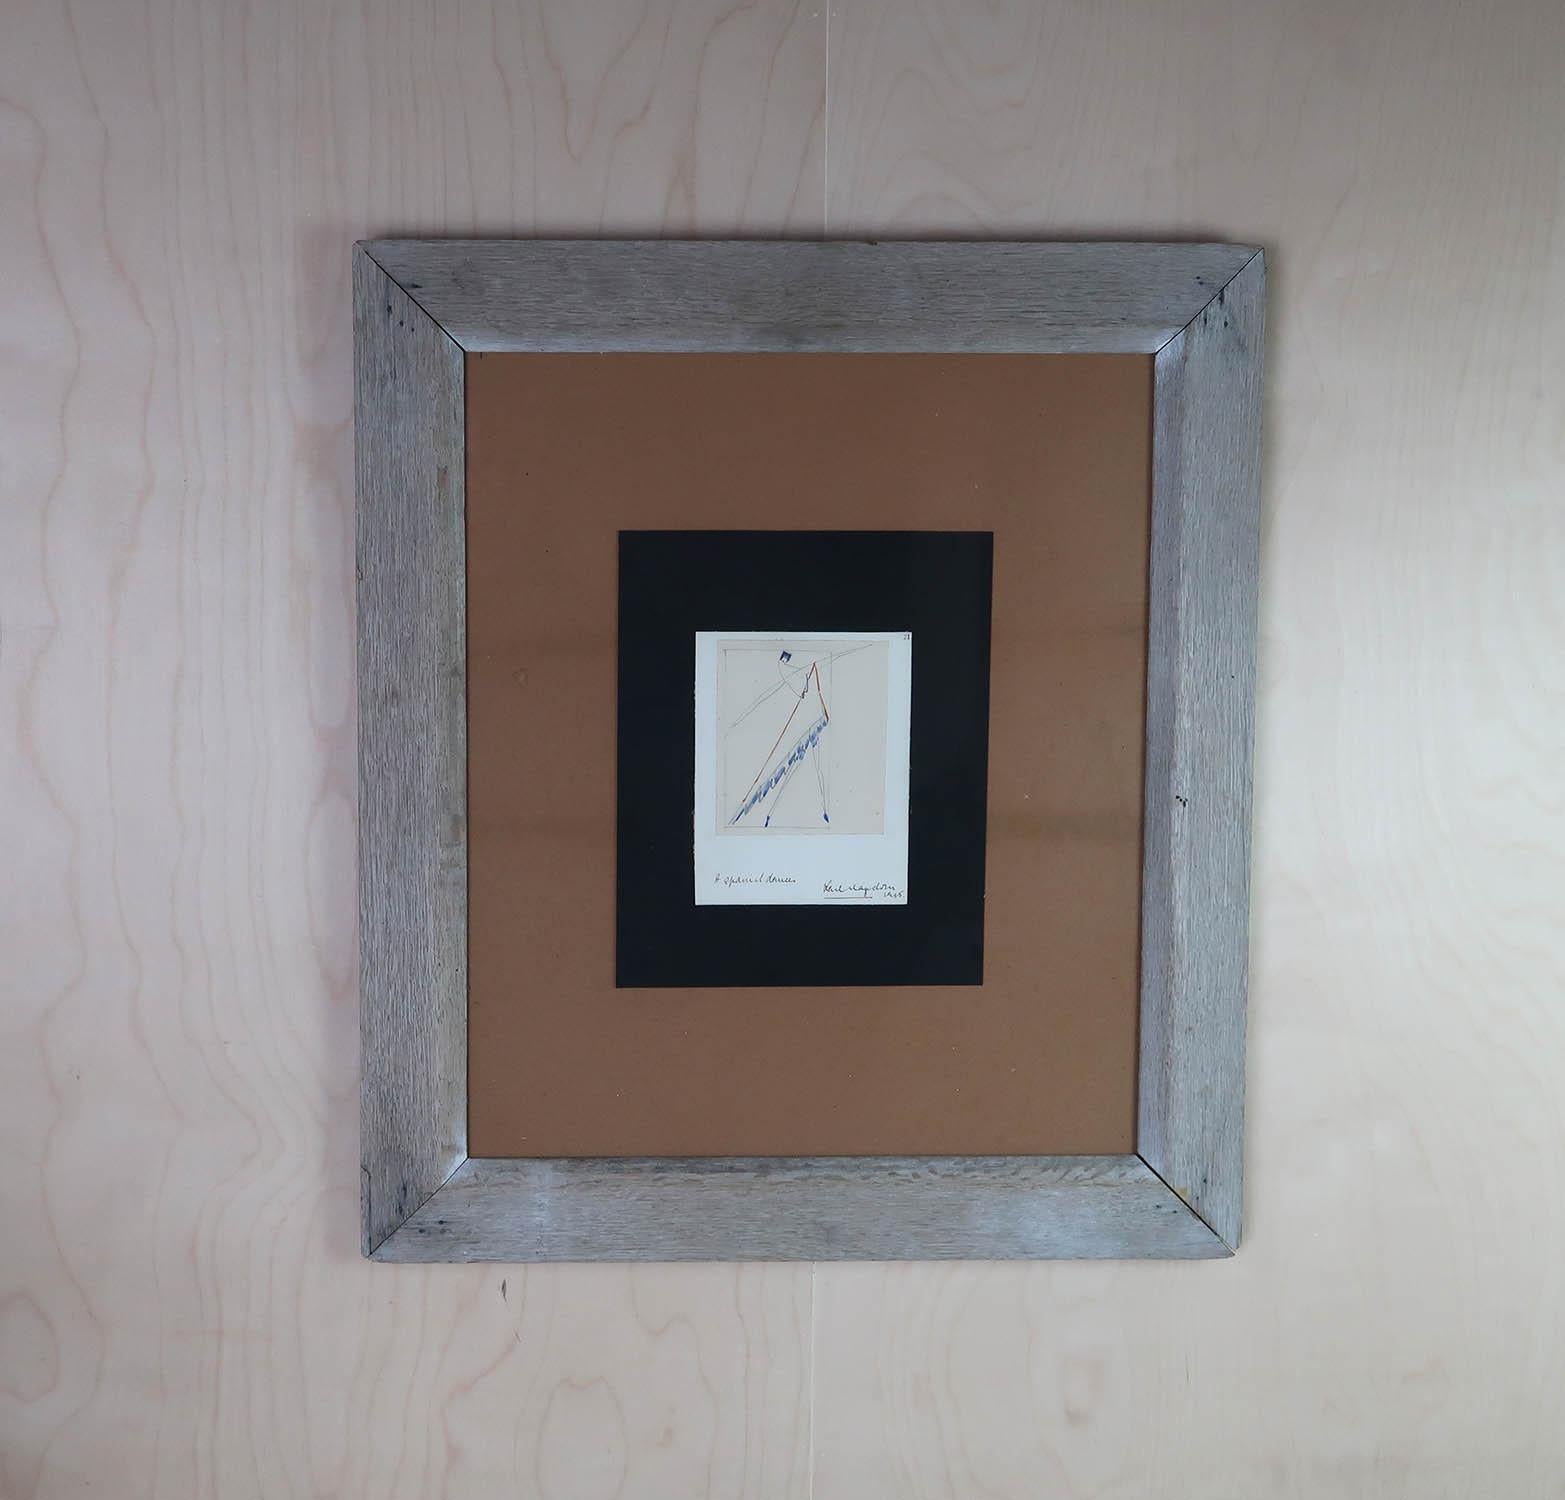 Wonderful drawing of a Spanish dancer by Karl Hagedorn.

Displaying the characteristic futurist, cubist and Bauhaus influences reminiscent of his early work.

Signed and dated 1915.

Presented in an antique distressed oak frame. The